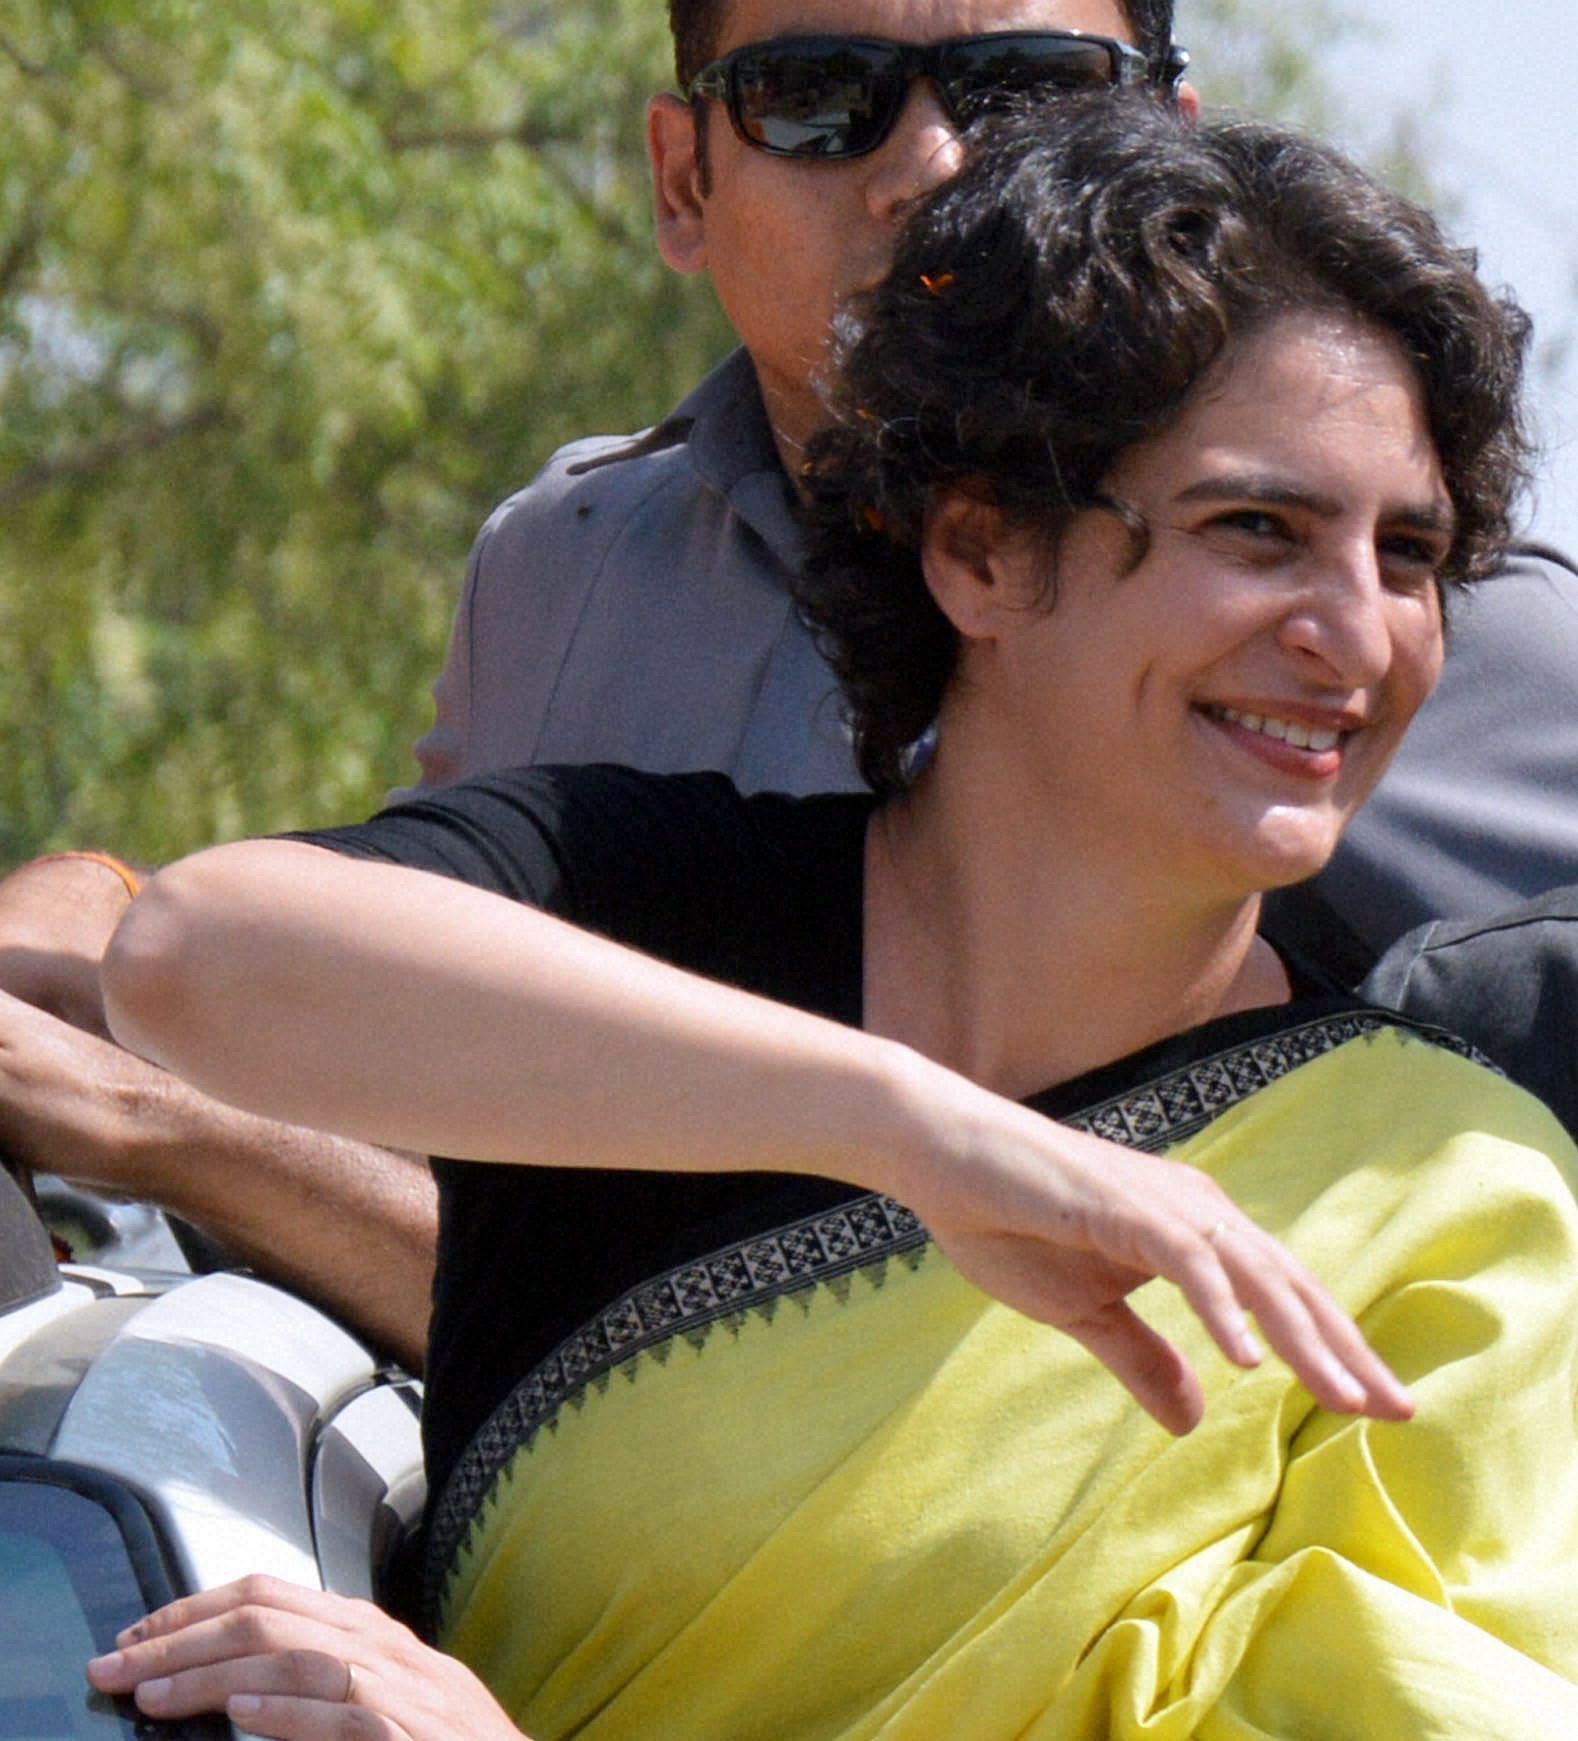 Barely days before the Congress Working Committee meeting in Delhi, demands for Priyanka Gandhi Vadra's installation as party leader have surfaced again in Uttar Pradesh with cadres saying she alone could revive the party.